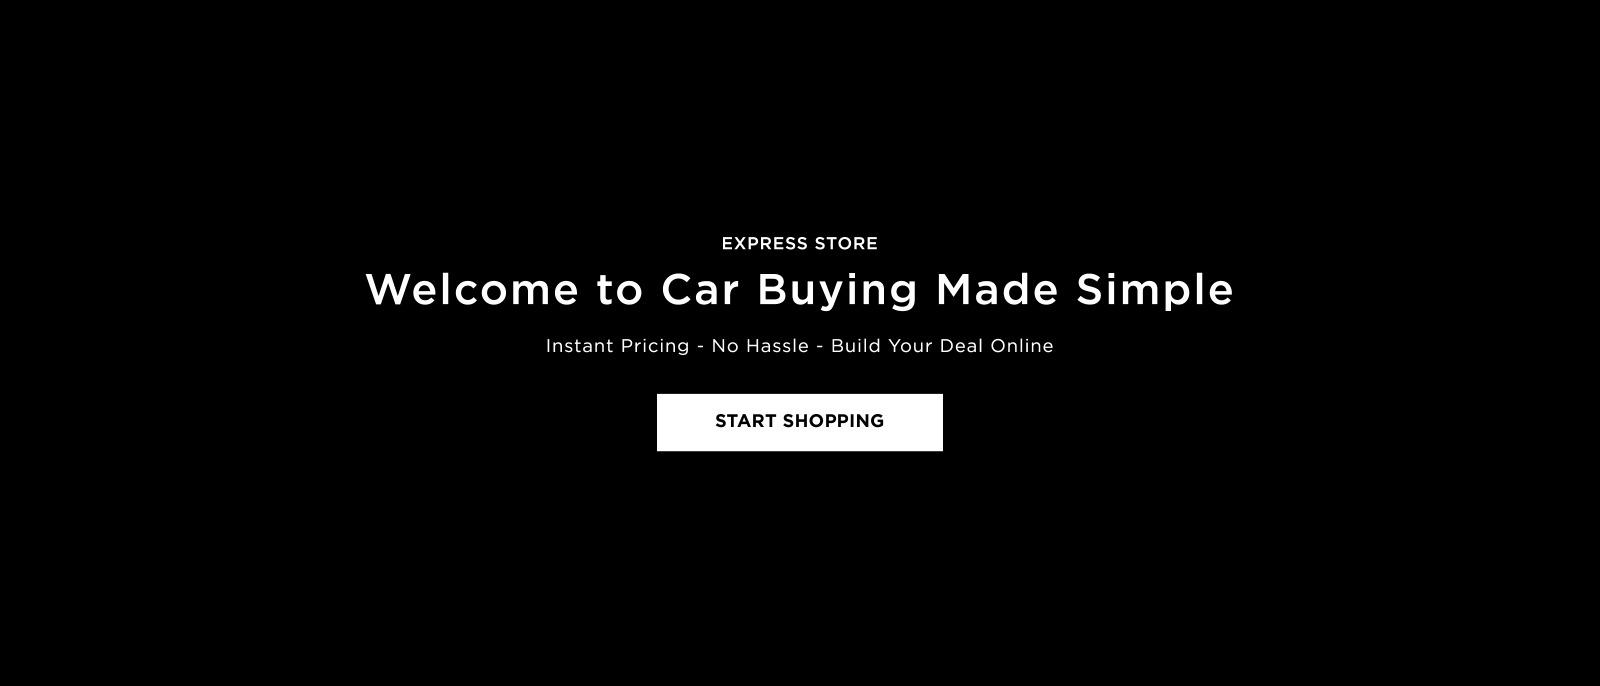 EXPRESS STORE 
Welcome to Car Buying Made Simple 
Instant Pricing - No Hassle - Build Your Deal Online